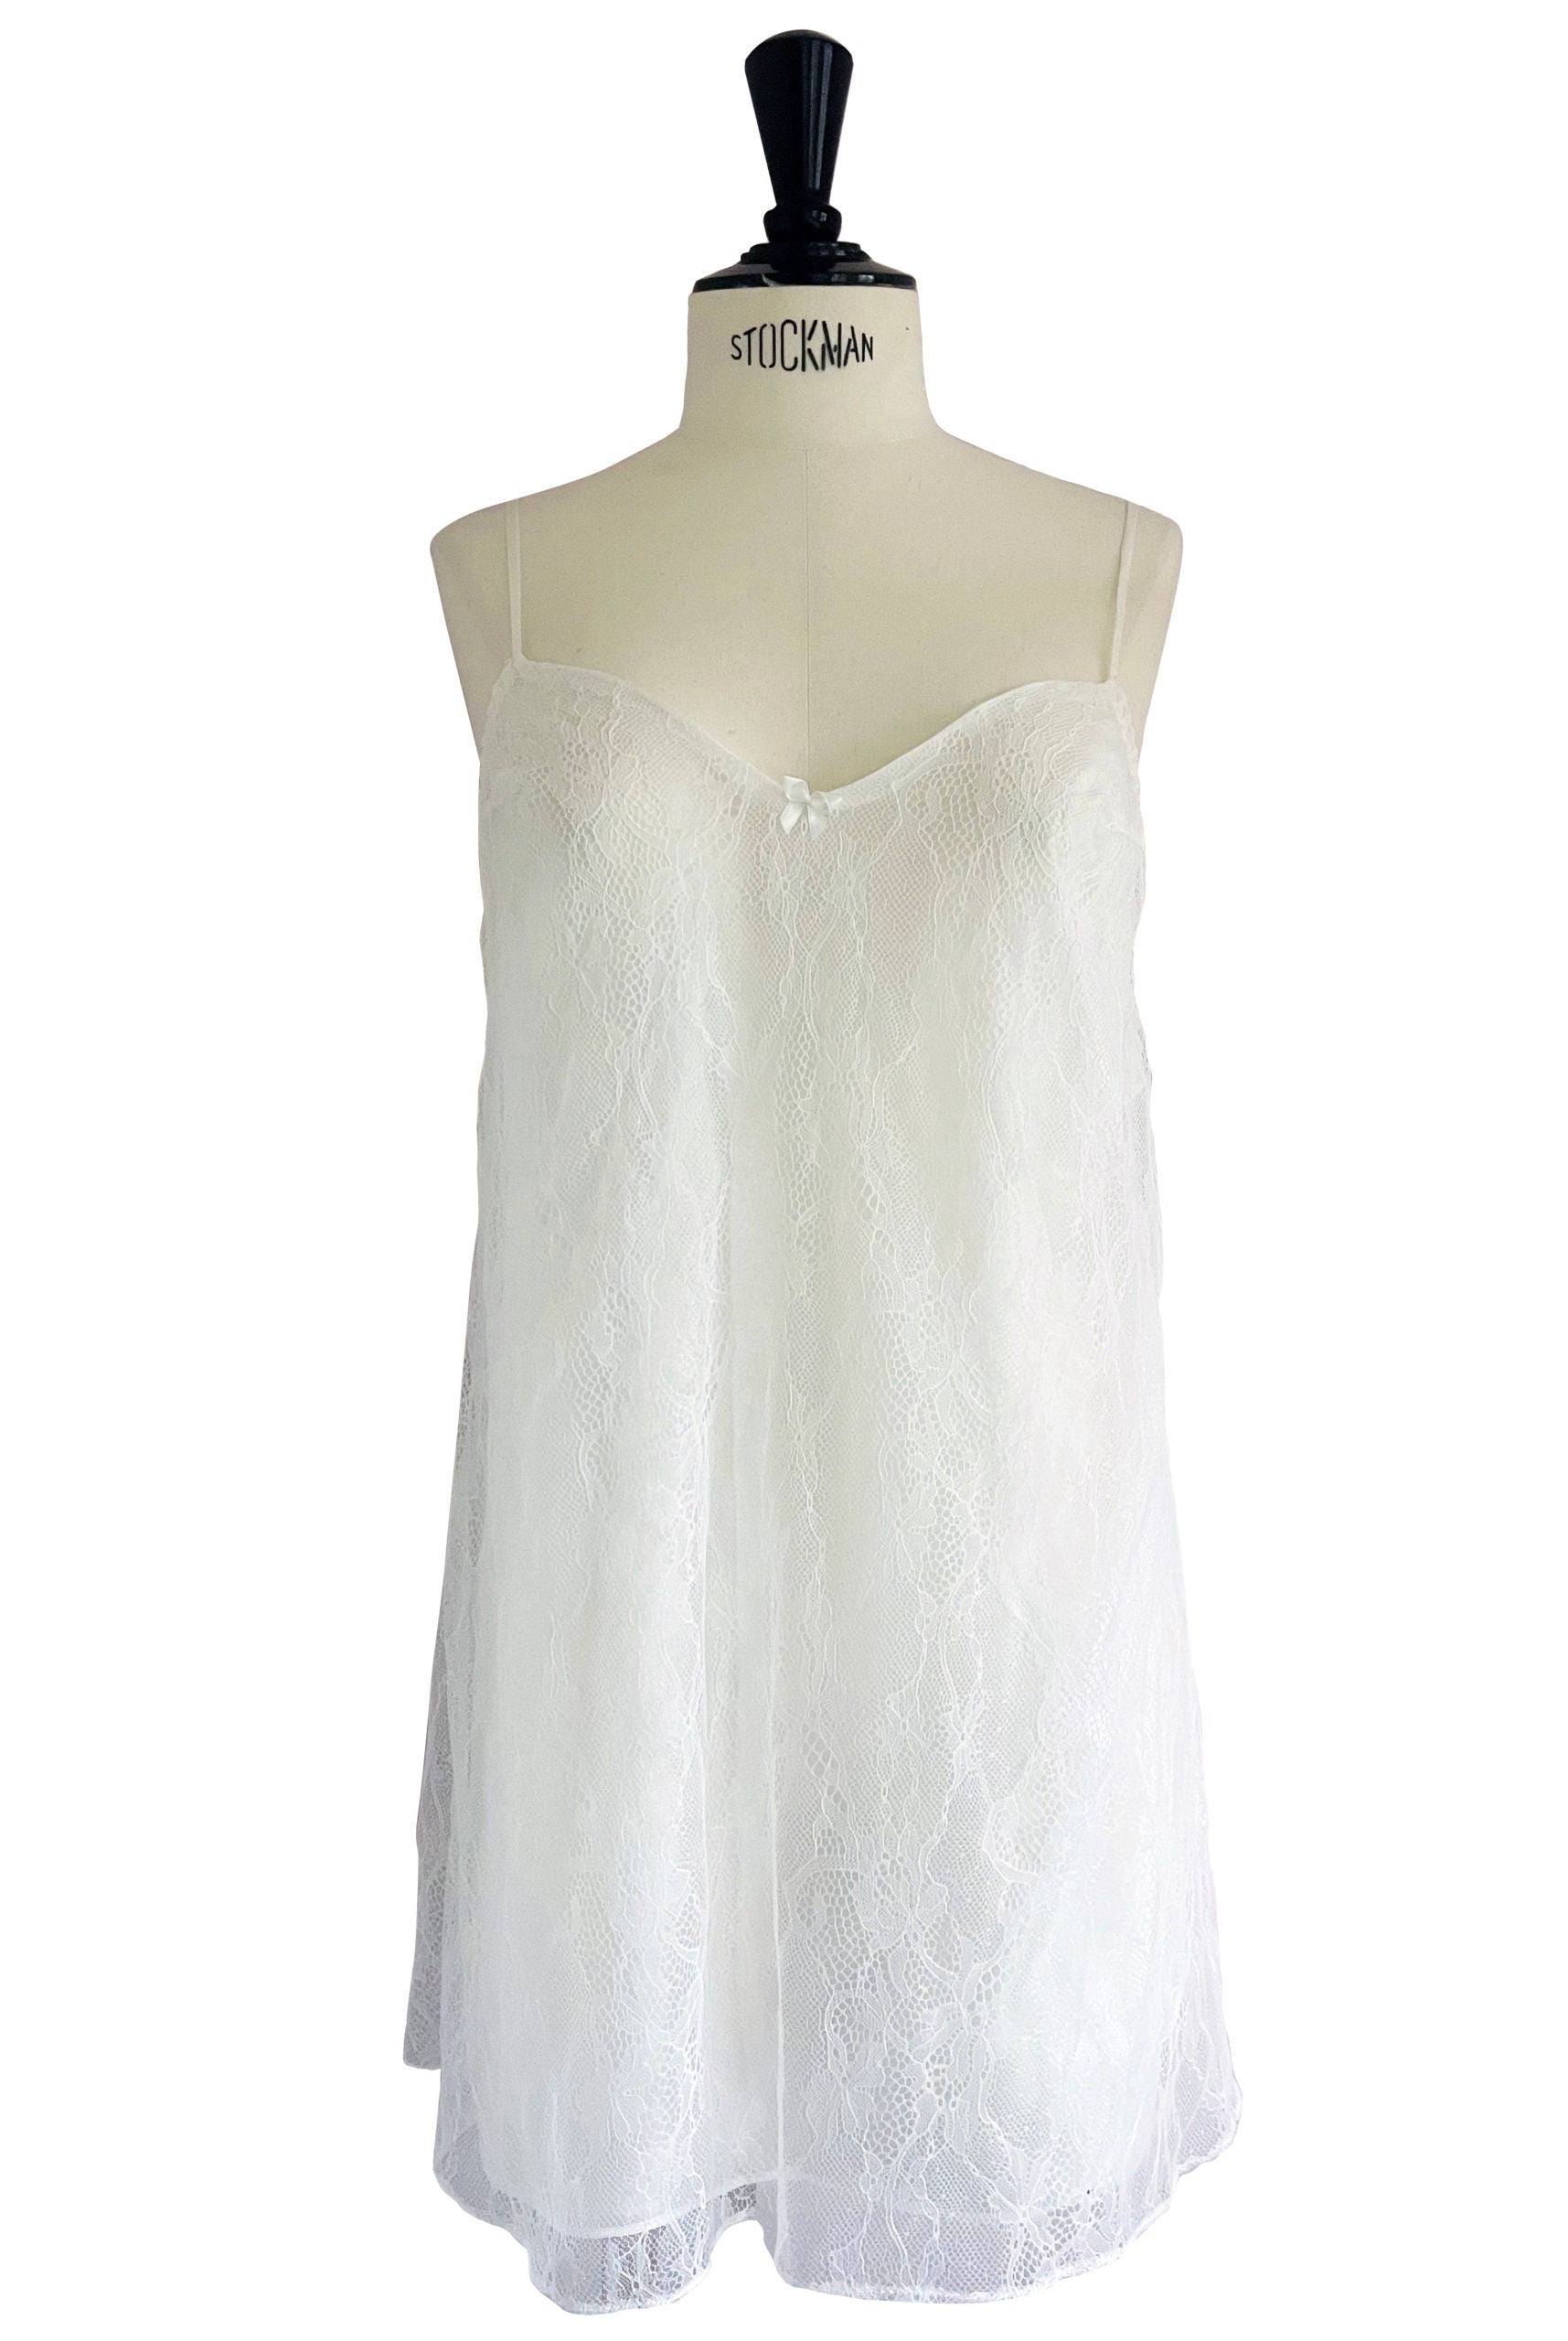 Babydoll nightdress in white with all-over lace top layer - Ariane Delarue Lingerie